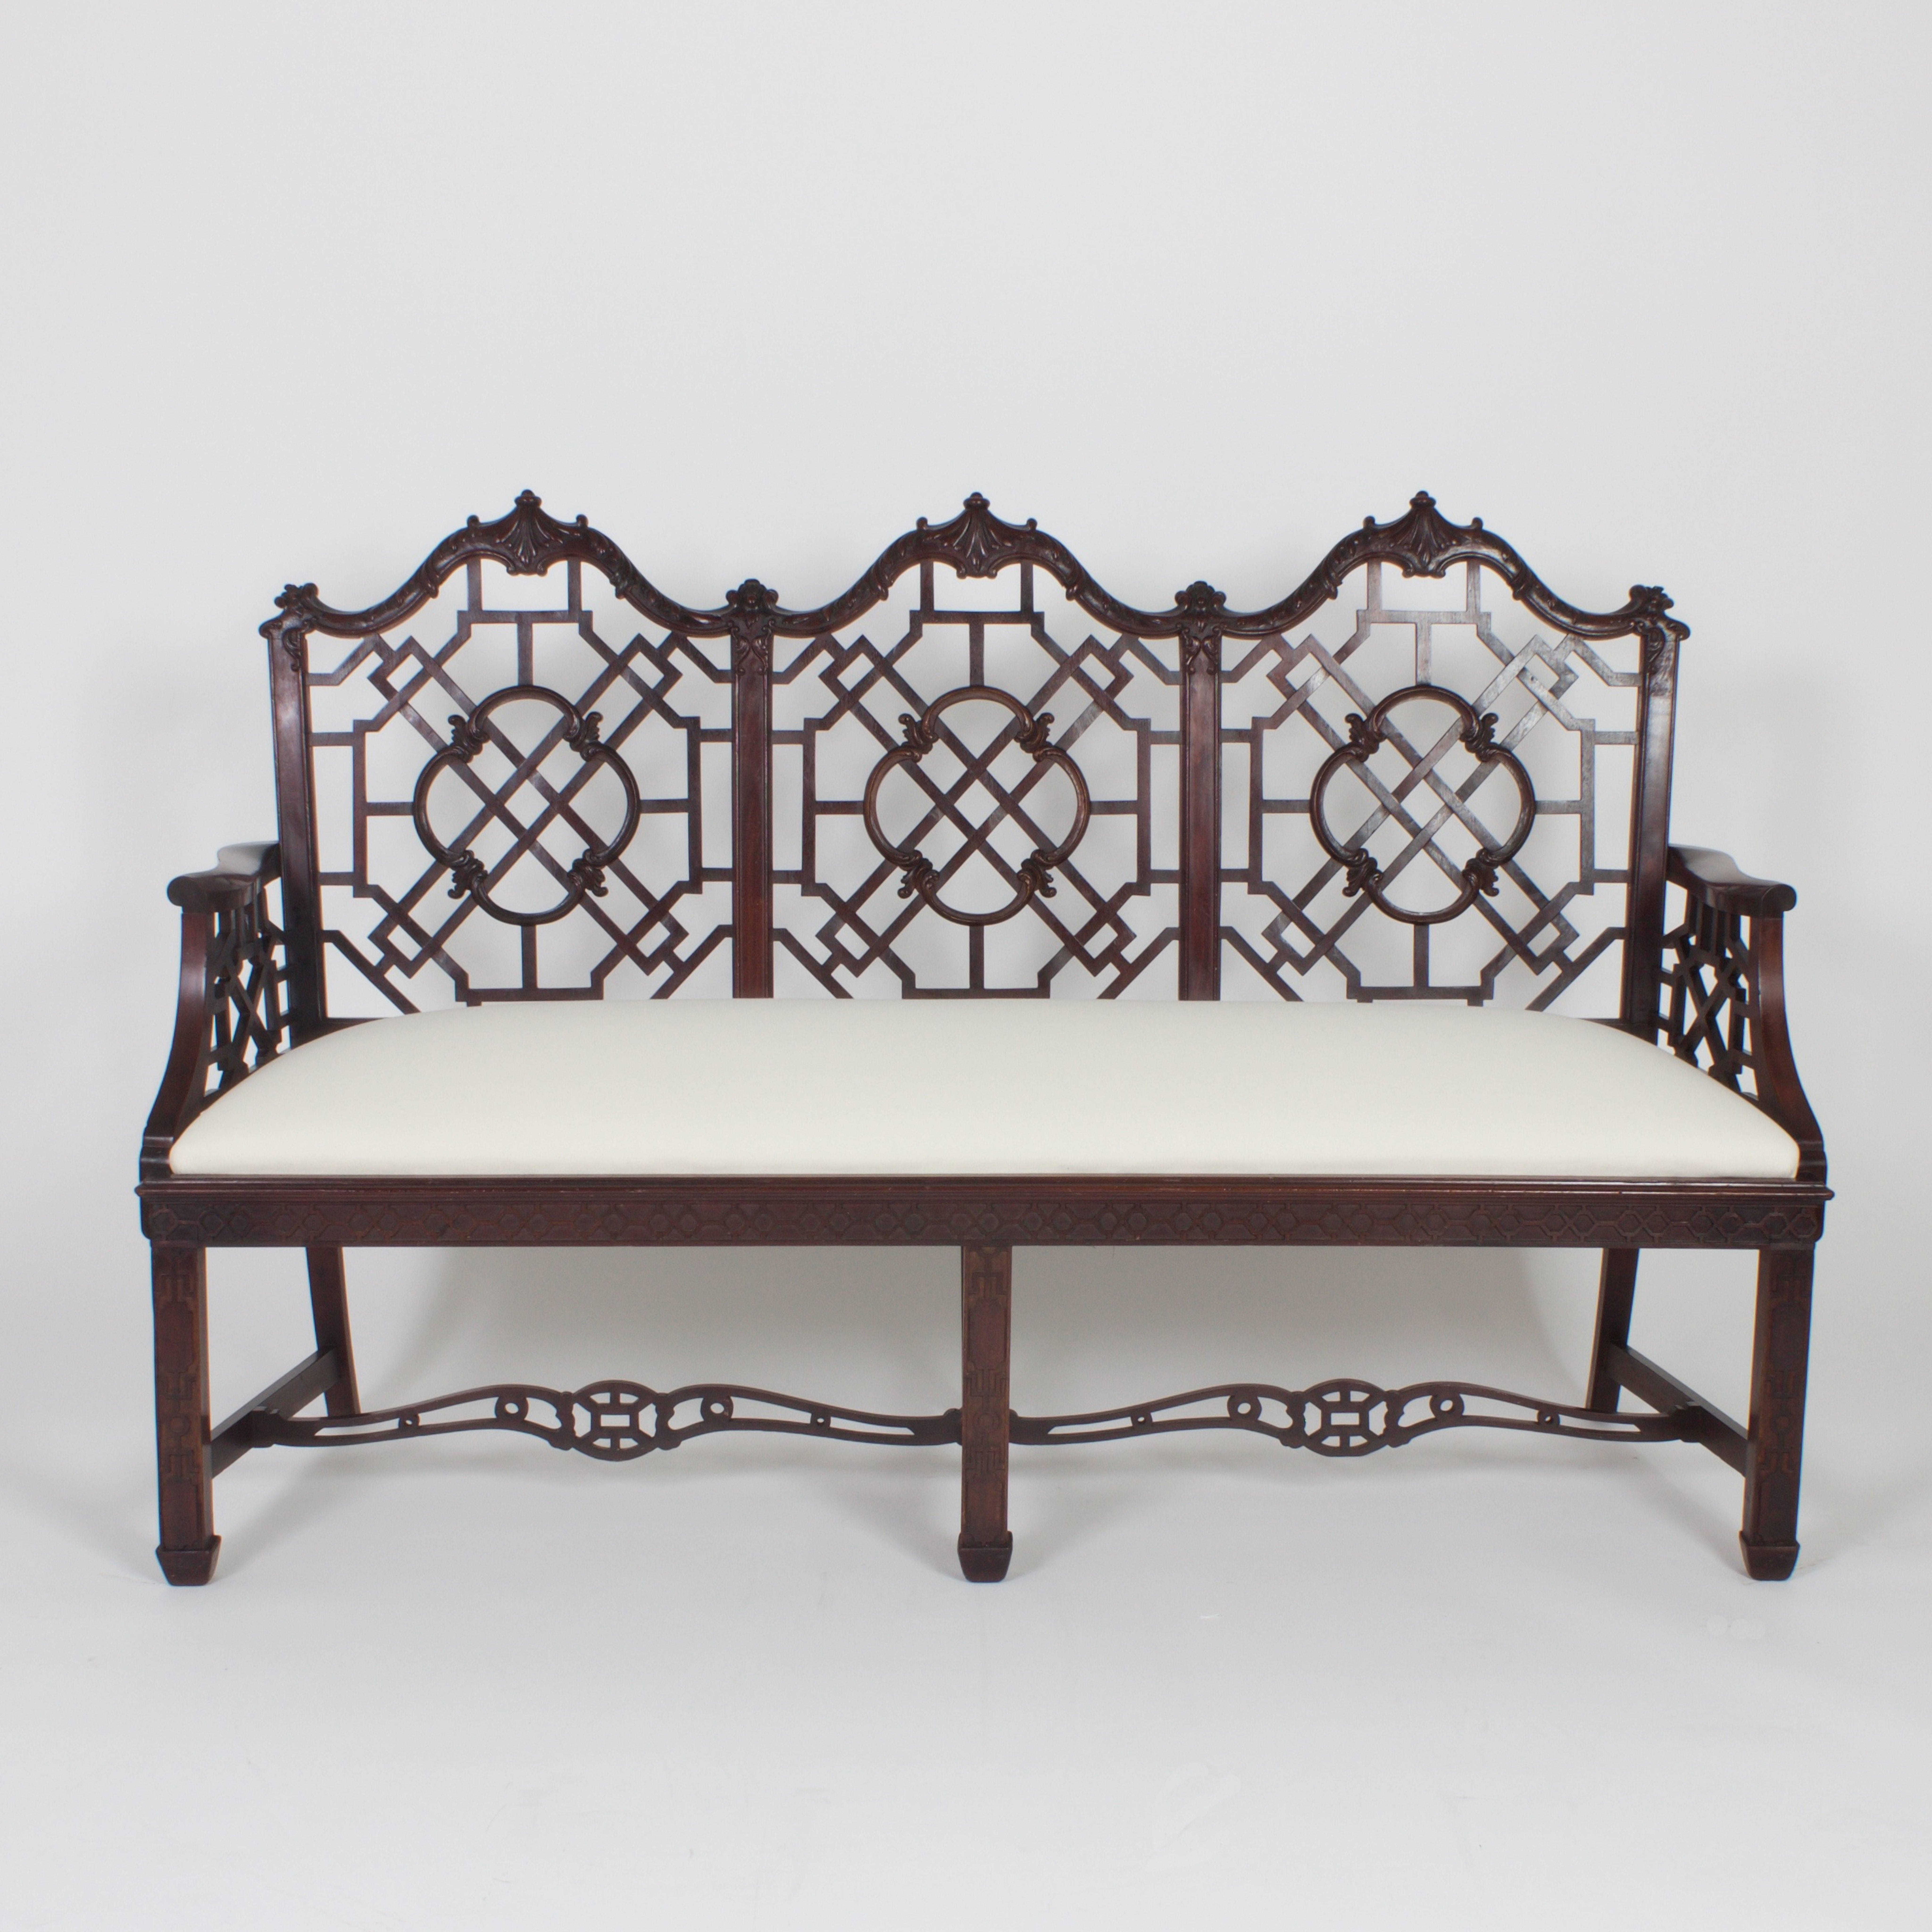 Antique English Chinese Chippendale style settee expertly crafted and carved of mahogany. The back has three joyous trellis panels with stylized pagoda crests and floral centers. The trellis is repeated in the arms. The seat is supported by six